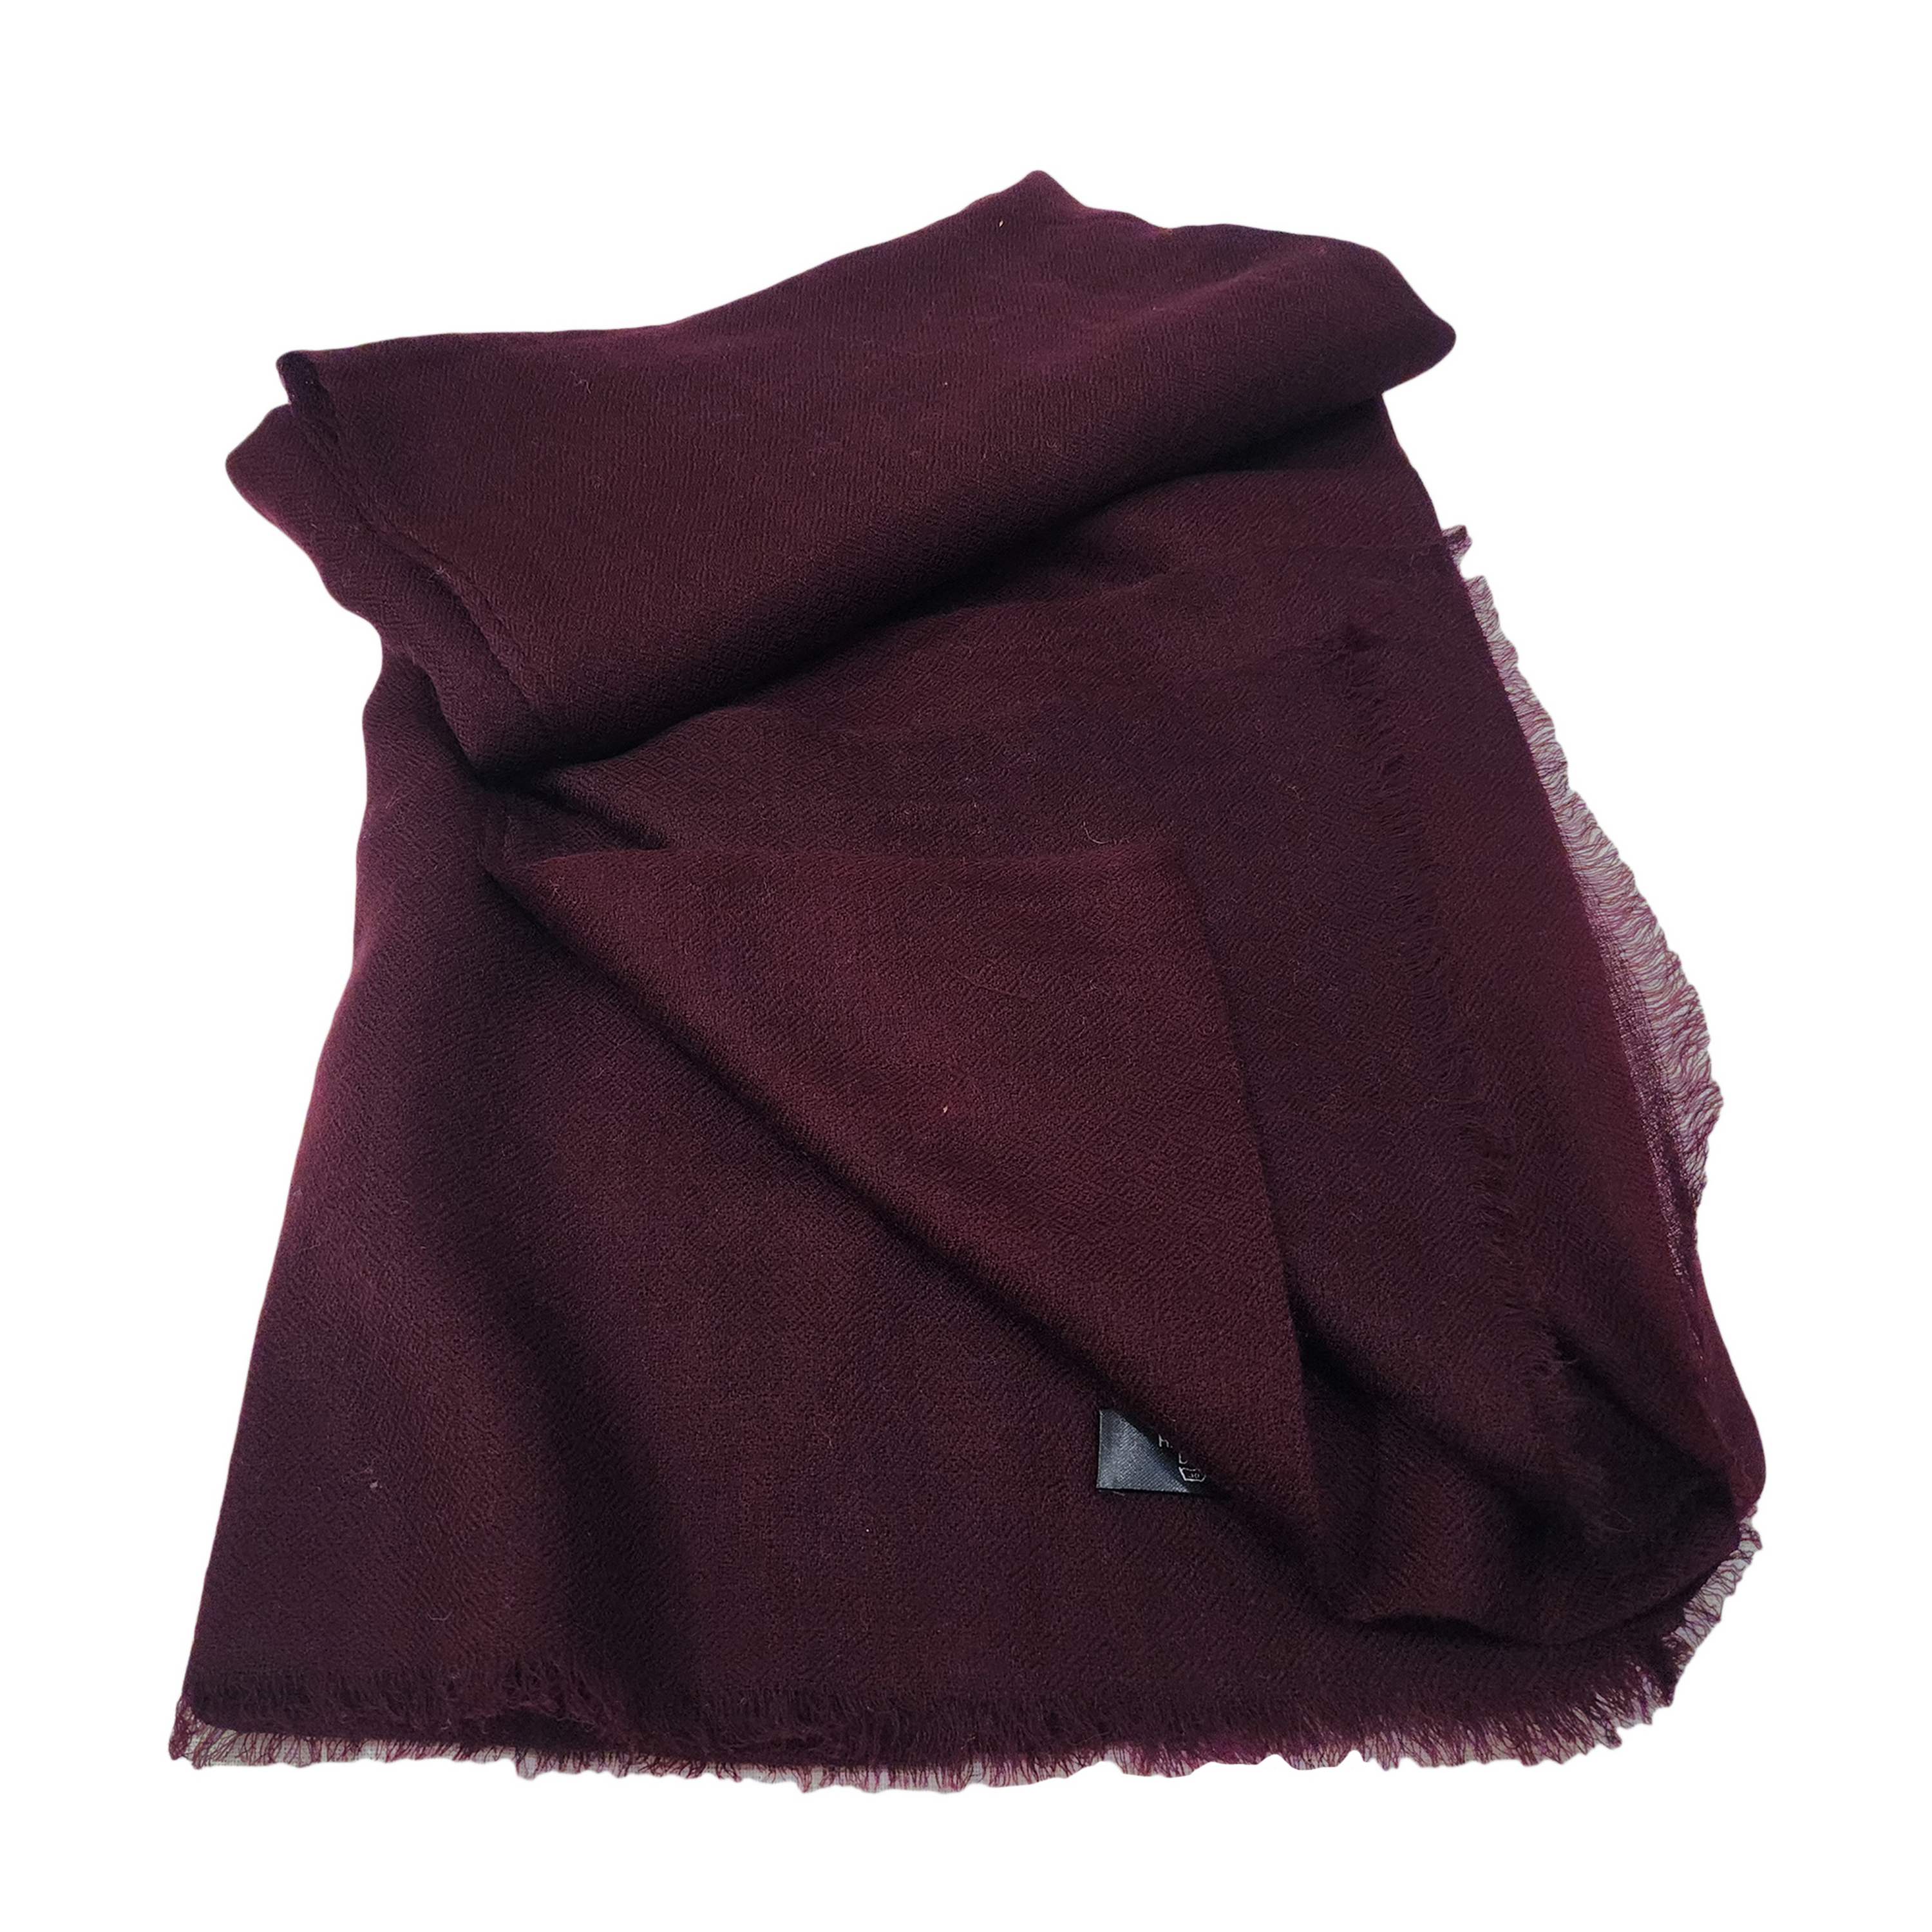 Ring Shawl, A Thin, Soft, And Light Shawl For All-weather Use, Two-ply Wool, Color maroon